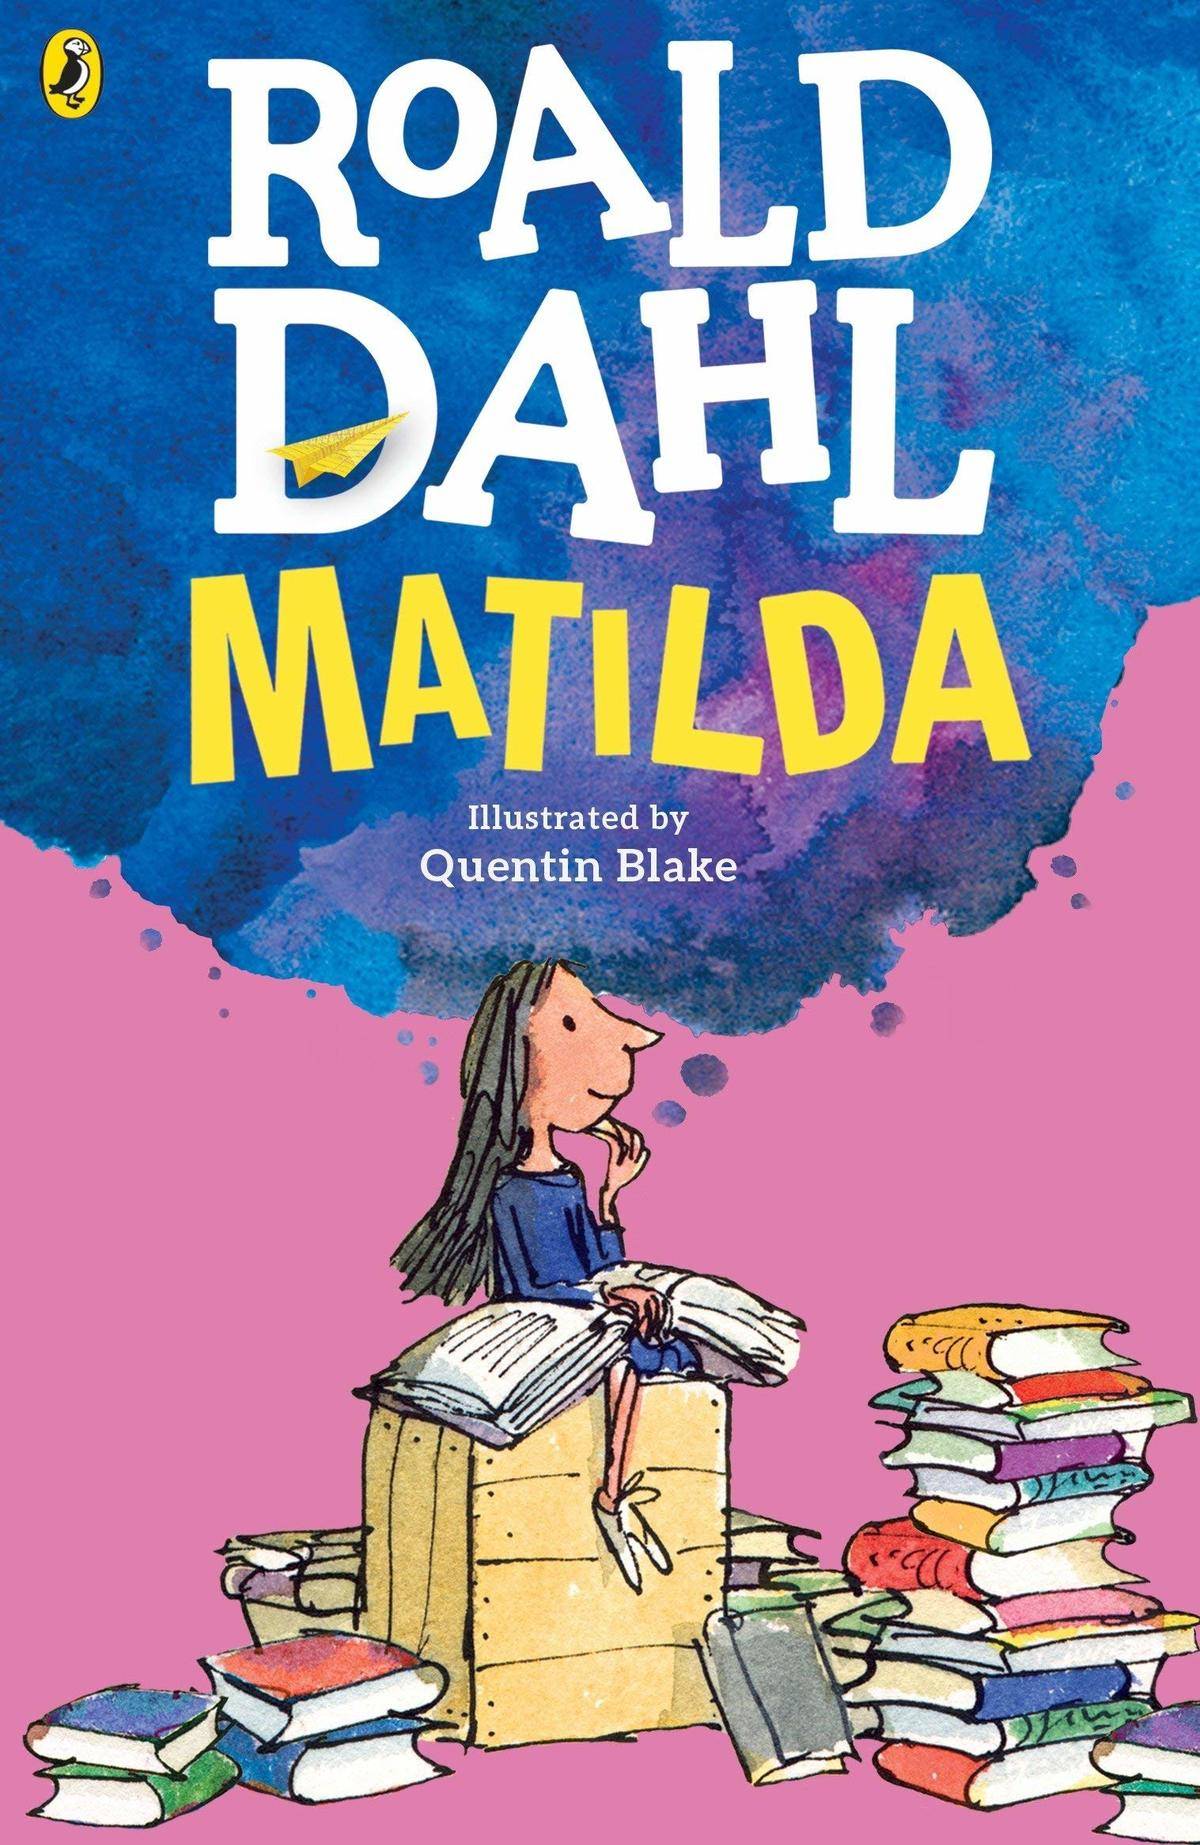 <p>Roald Dahl's imagination remains a gift to children everywhere. </p> <p>His magical tale about a special girl named Matilda who loved books more than anything inspires kids to read different kinds of literature, and always act with kindness. </p>